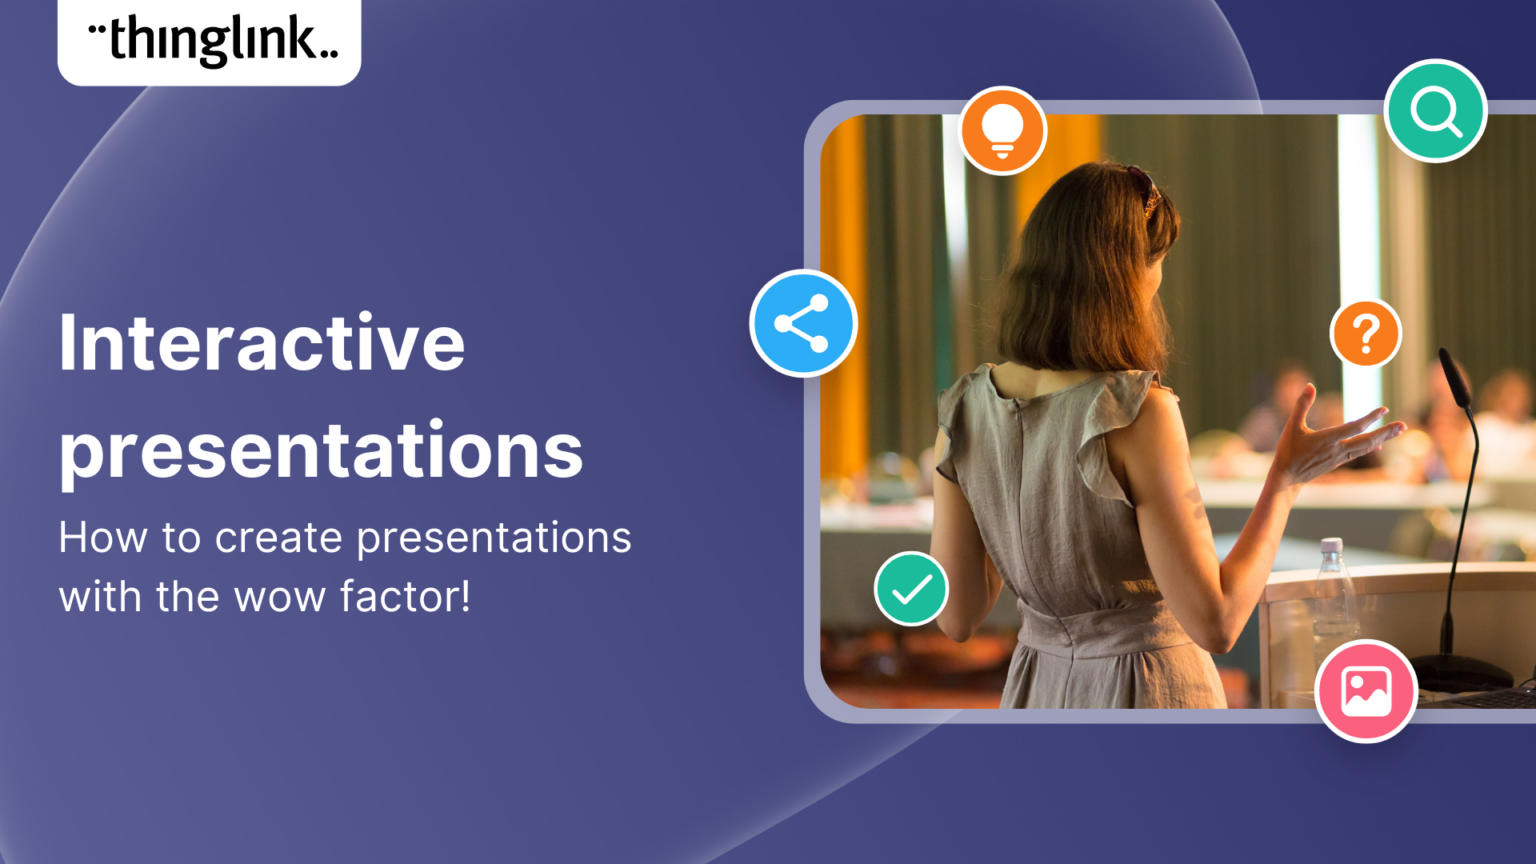 How to create interactive presentations with the wow factor